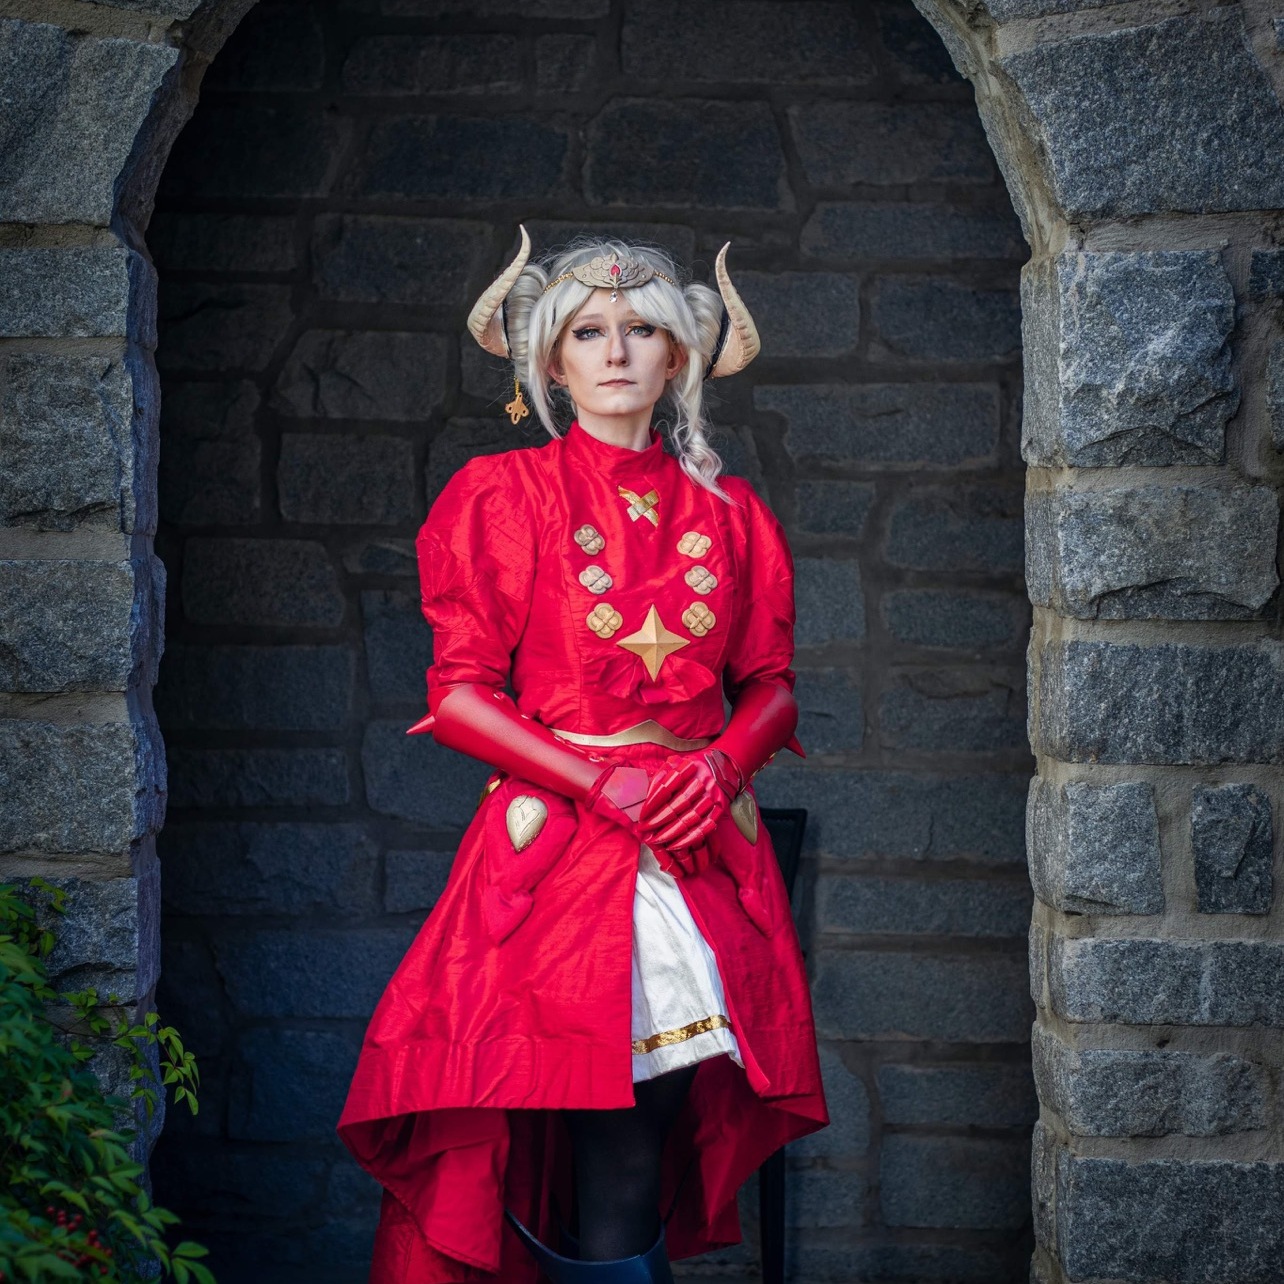 Woman with horns in a red cape and tunic in front of an old building.